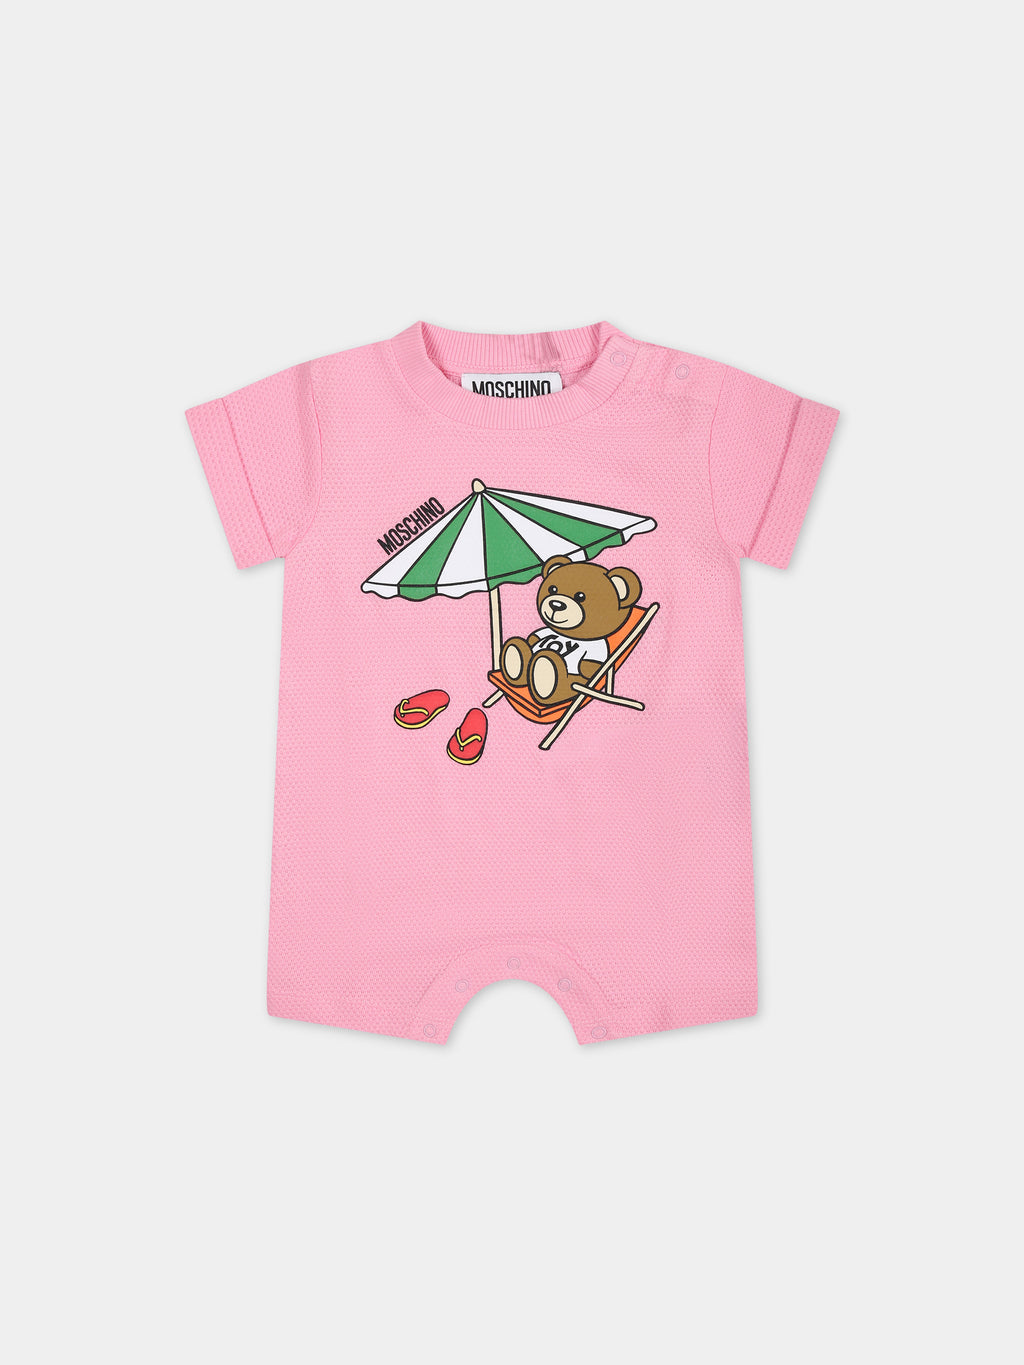 Pink romper for baby girl with Teddy Bear